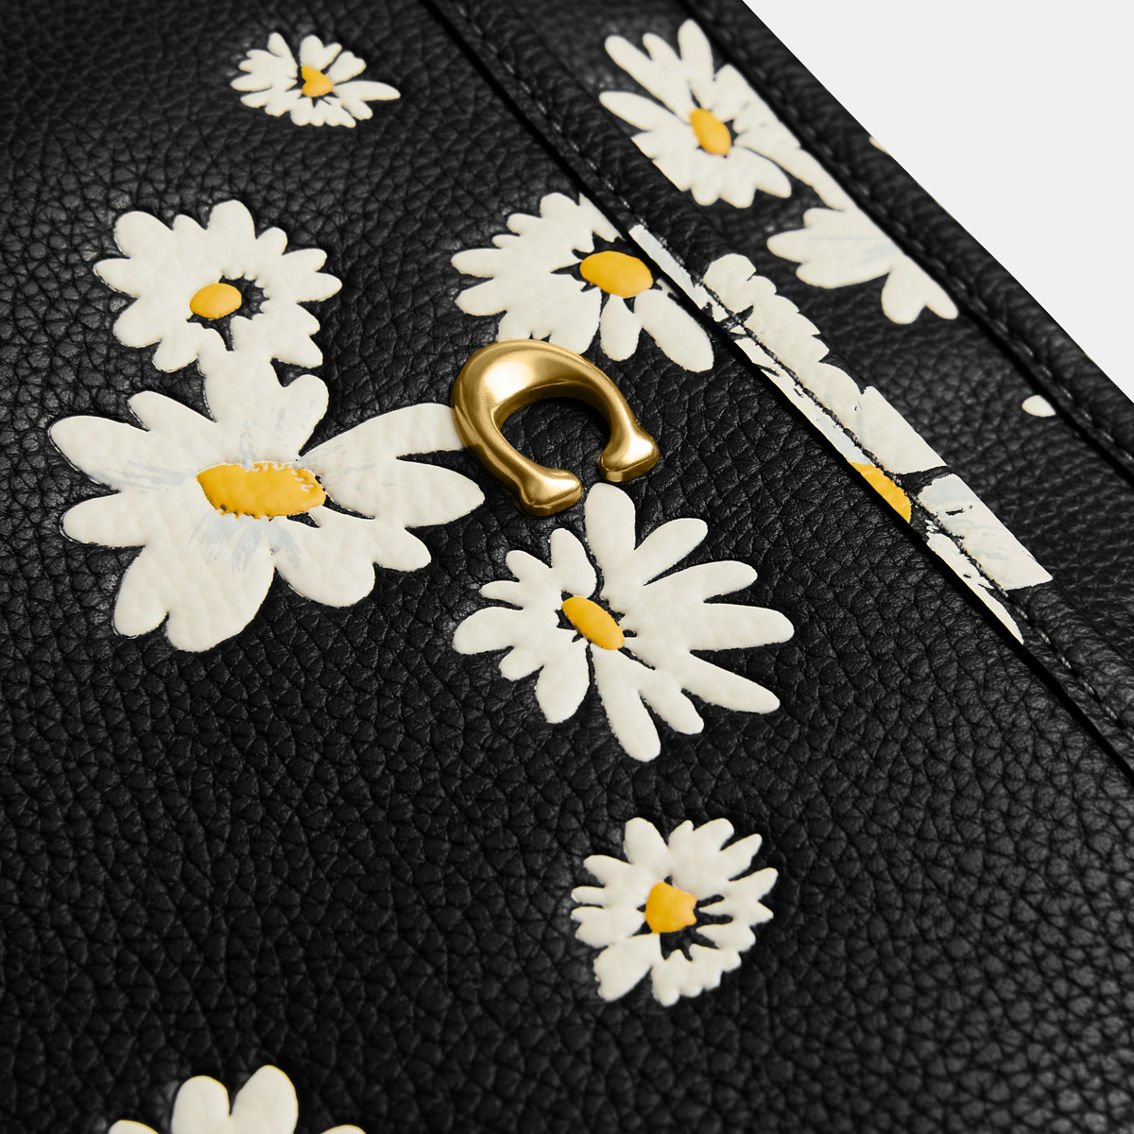 Coach Floral Printed Leather Kitt Crossbody Bag - Image 5 of 5